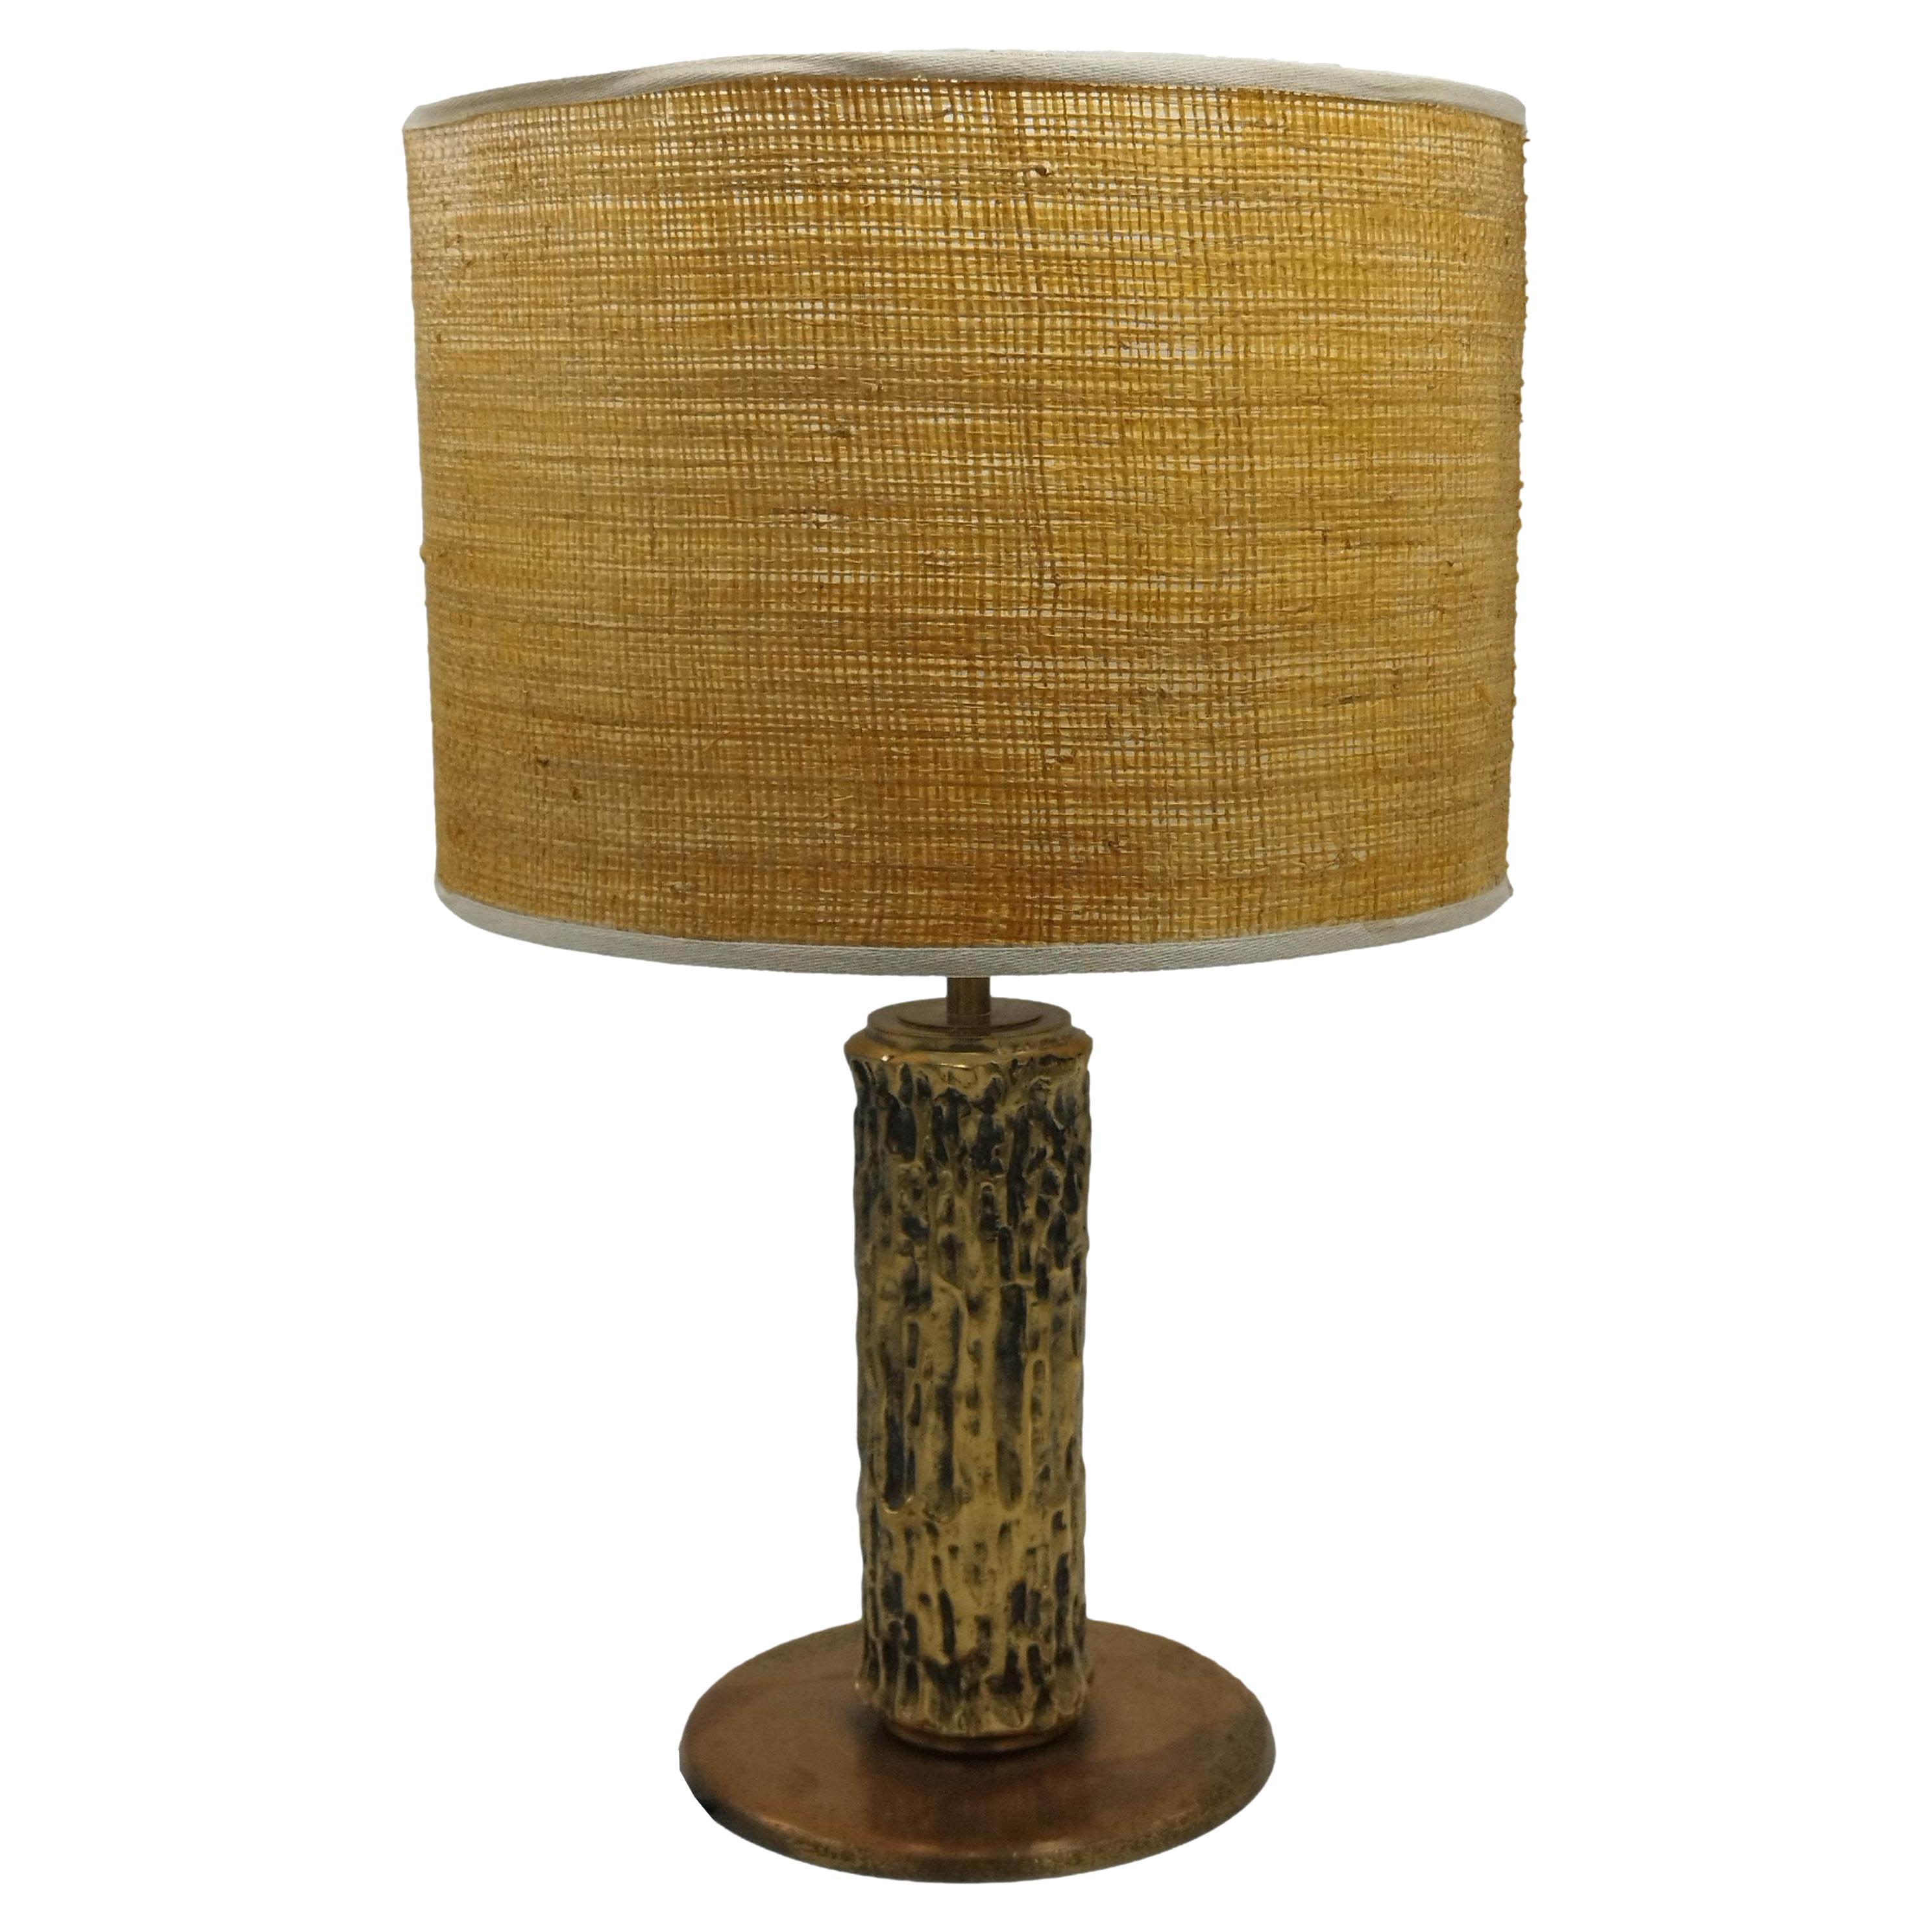 Luciano Frigerio Brass Table Lamp, Italy 1970s For Sale